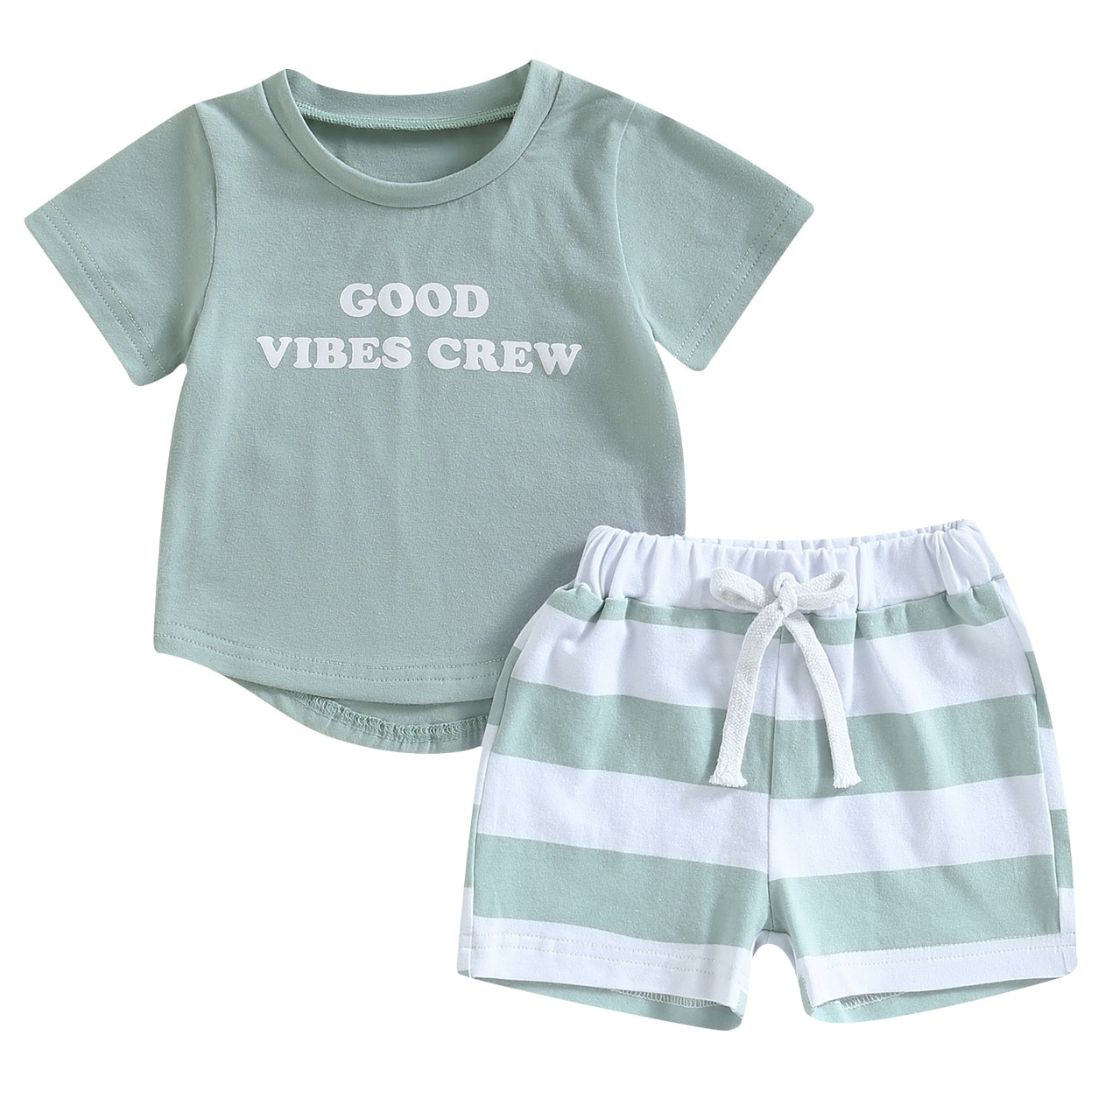 Little Boy Good Vibes Crew 2-Piece Outfit Set- My Trendy Youngsters | Buy Trendy and Afforable Baby and Toddler Clothing Sets @ My Trendy Youngsters - Dress your little man in Style @ My Trendy Youngsters 